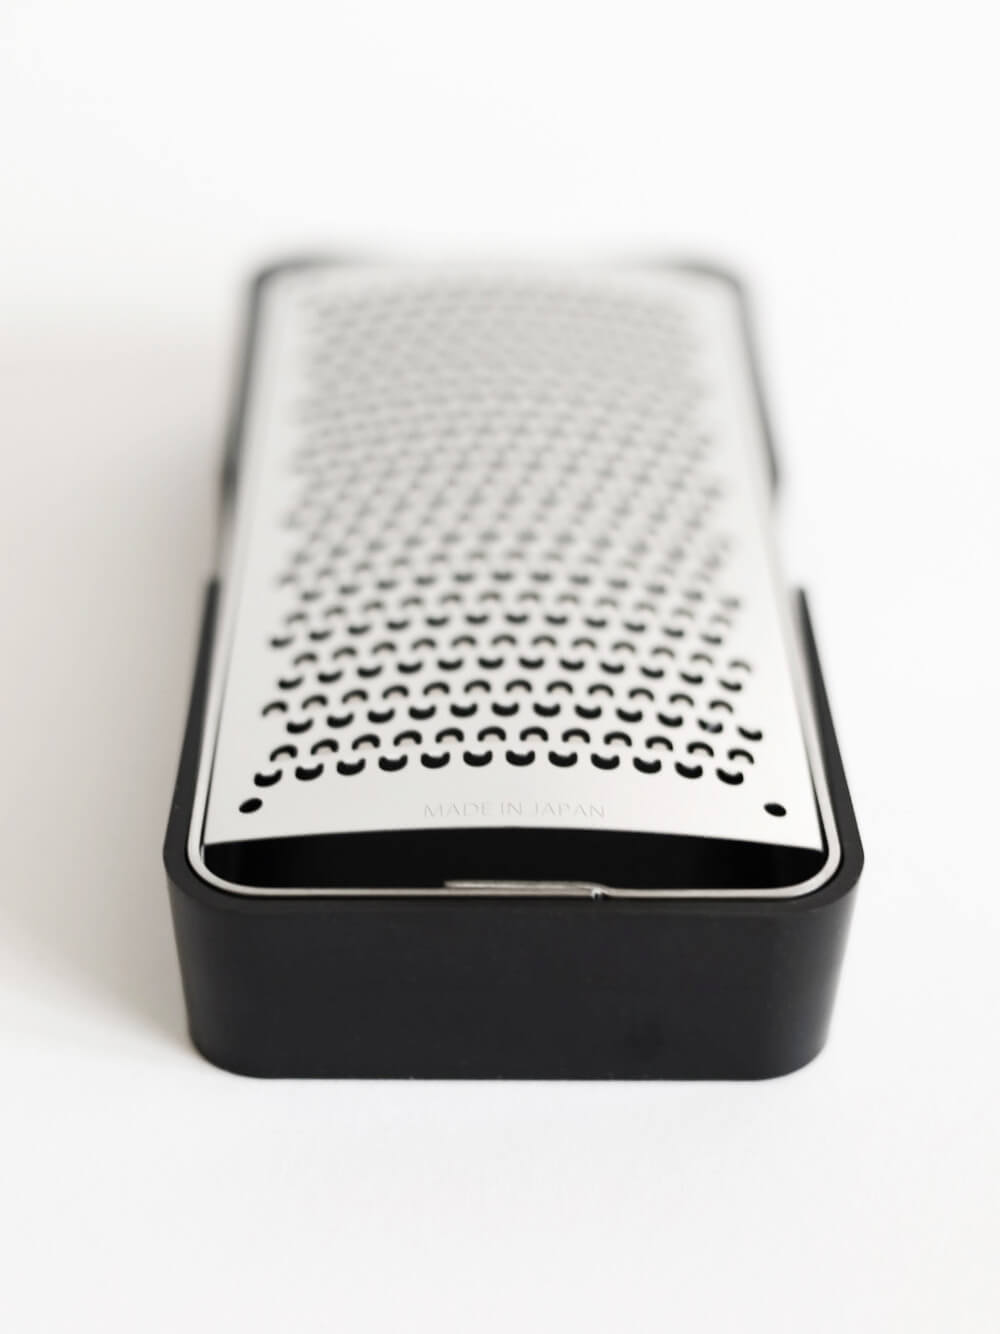 stainless-steel-ever-grater-5